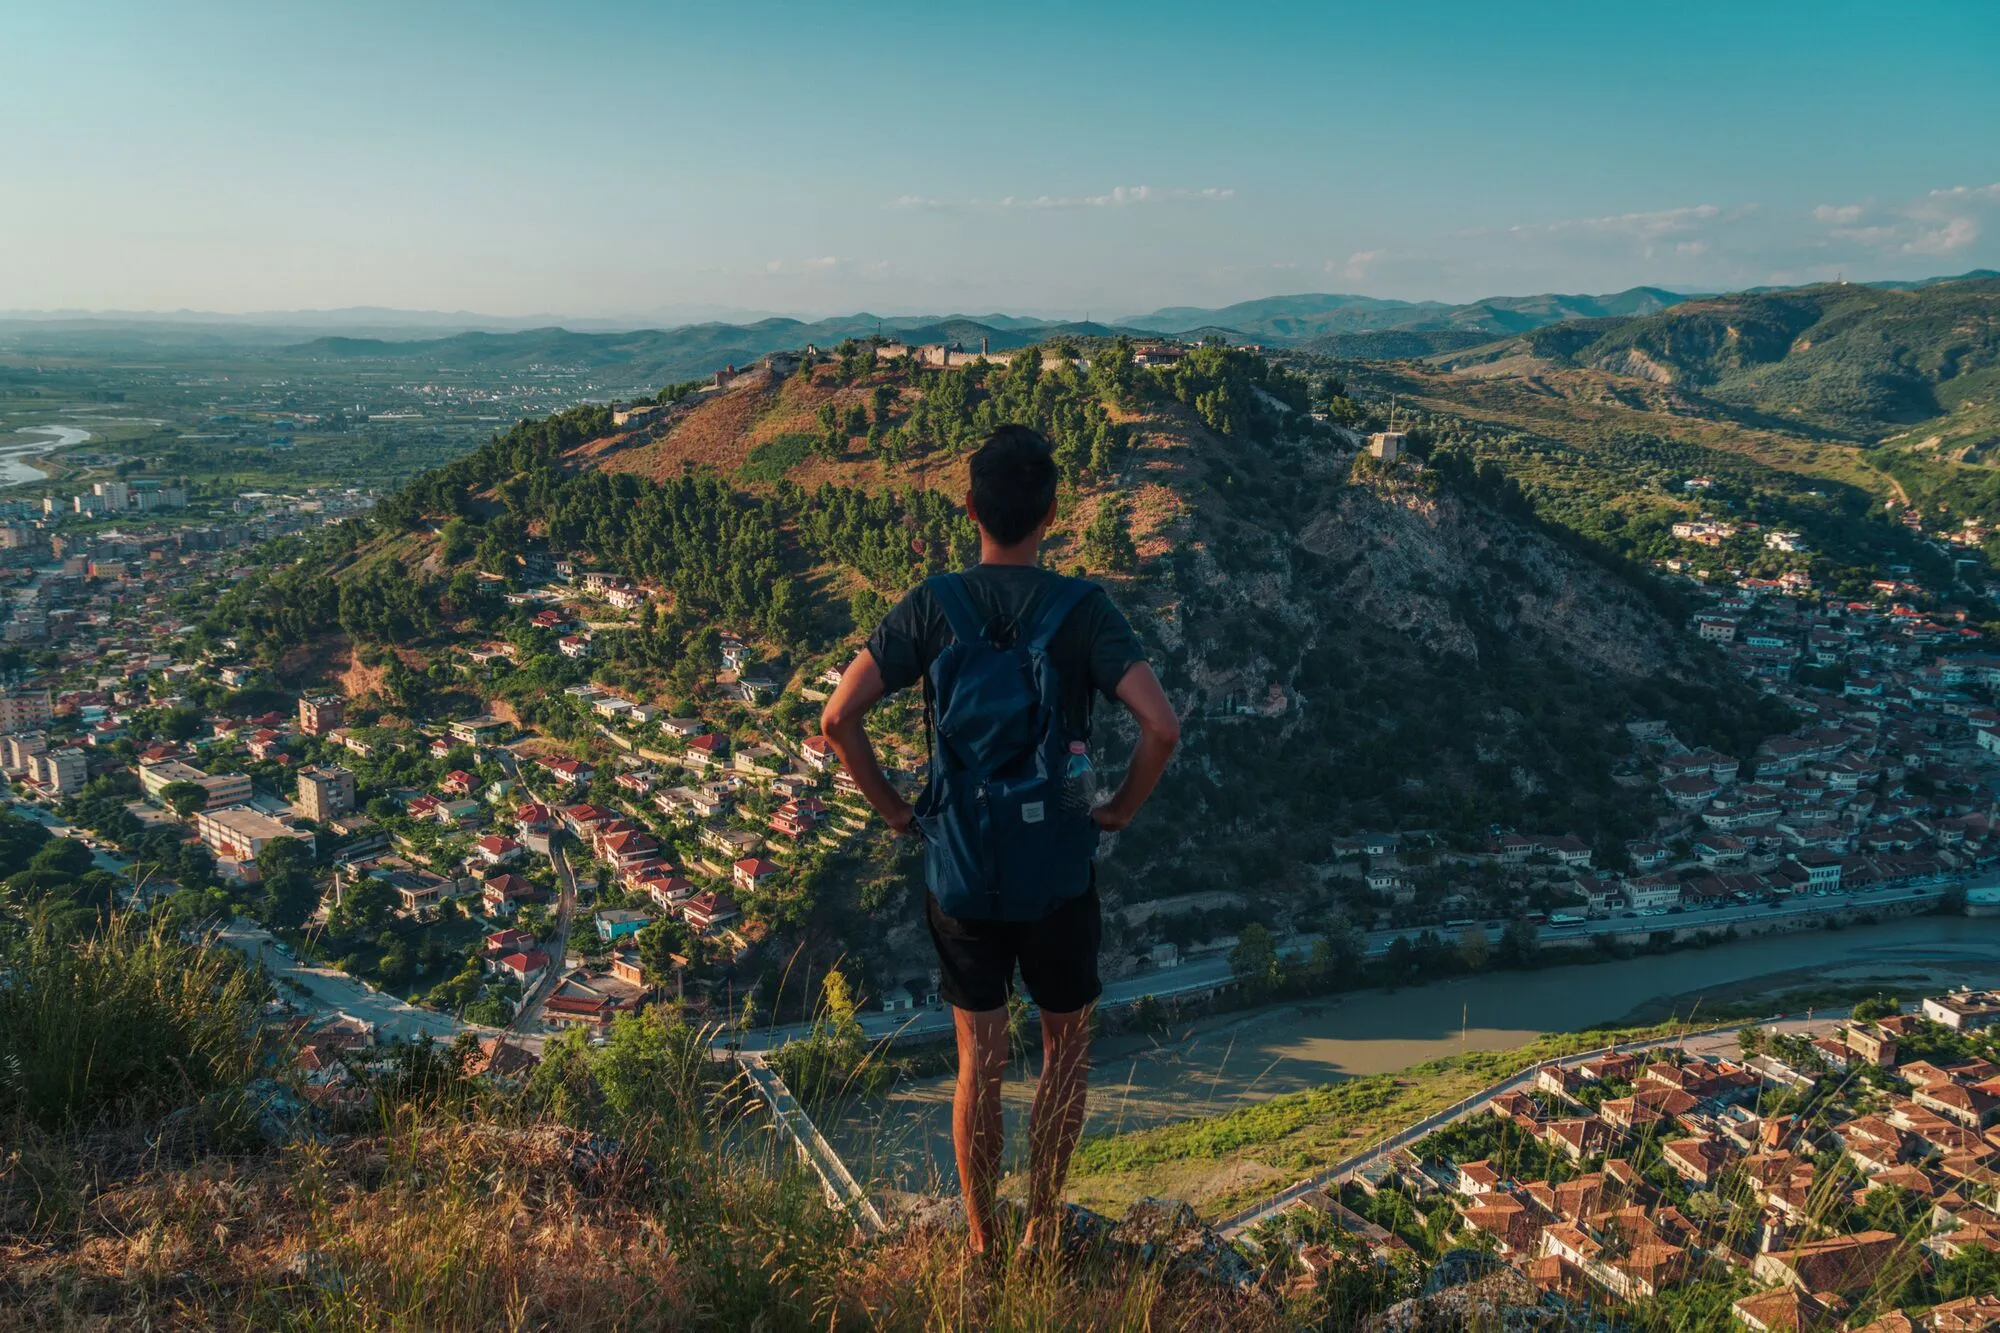 Top 8 Things to Do in Berat, Albania for First-Timers - A Complete Guide to Backpacking Berat